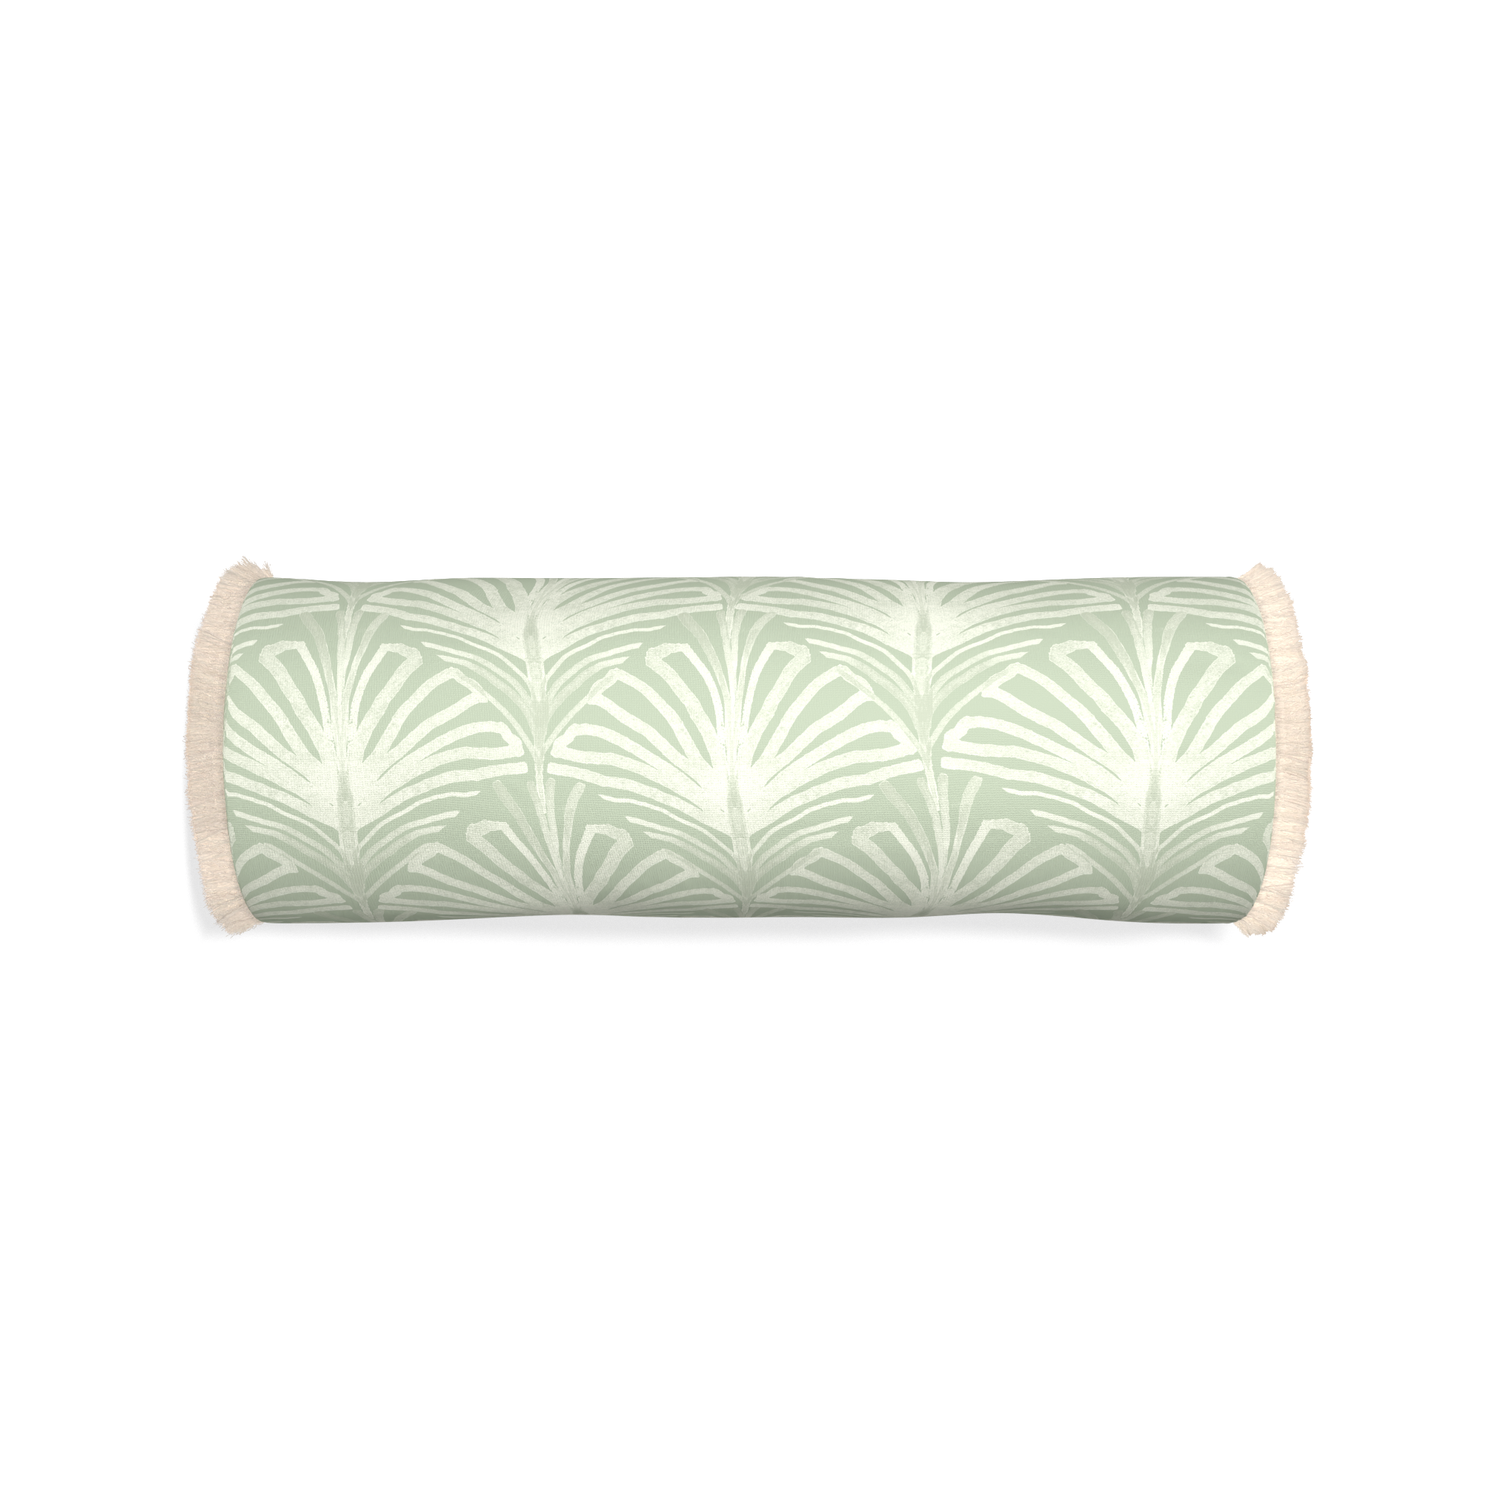 Bolster suzy sage custom sage green palmpillow with cream fringe on white background